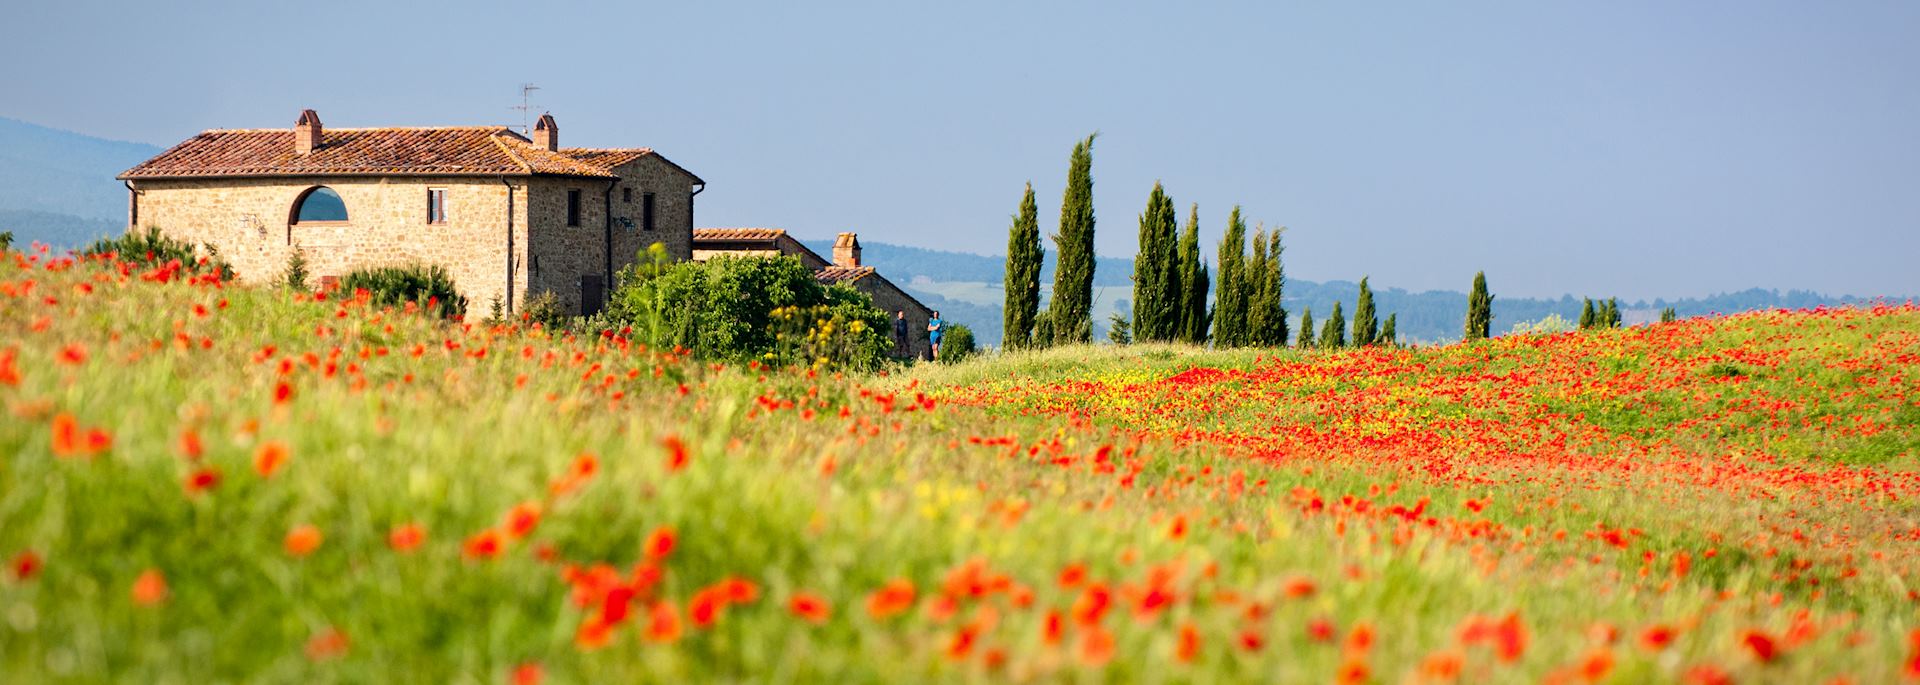 Poppies growing in Tuscany